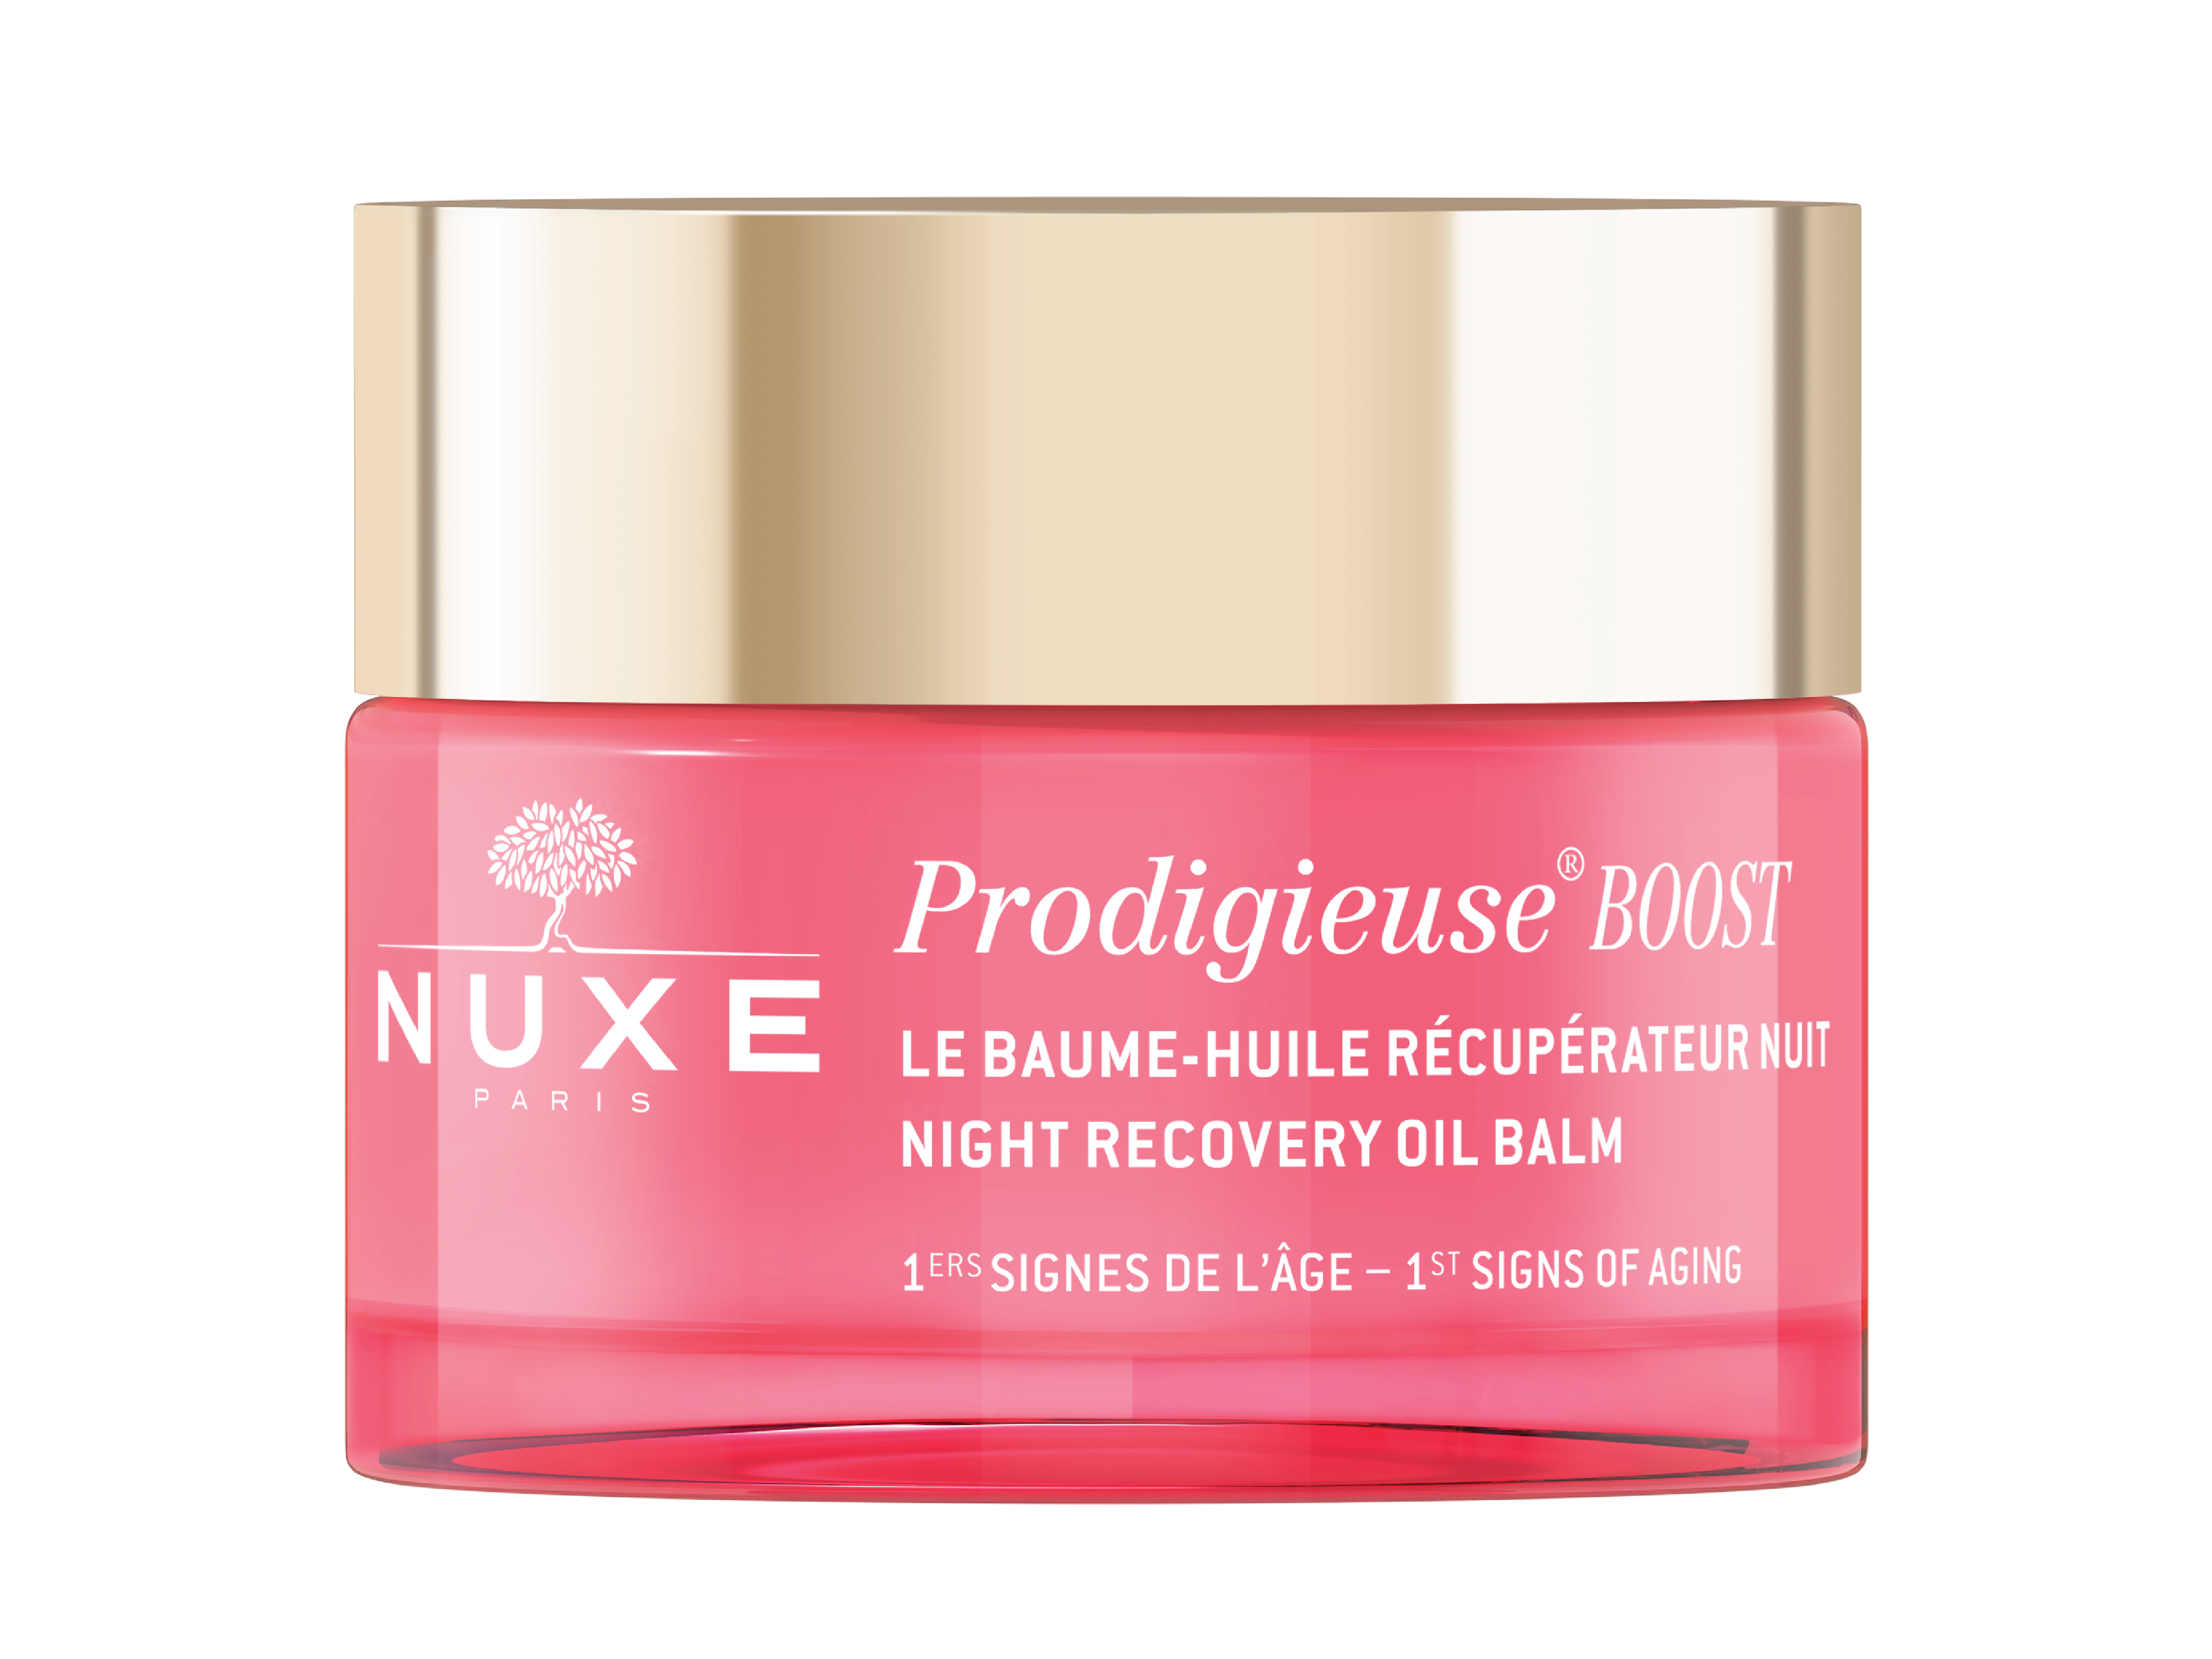 NUXE Prodigieuse Boost Night Recovery Oil Balm, 50 ml